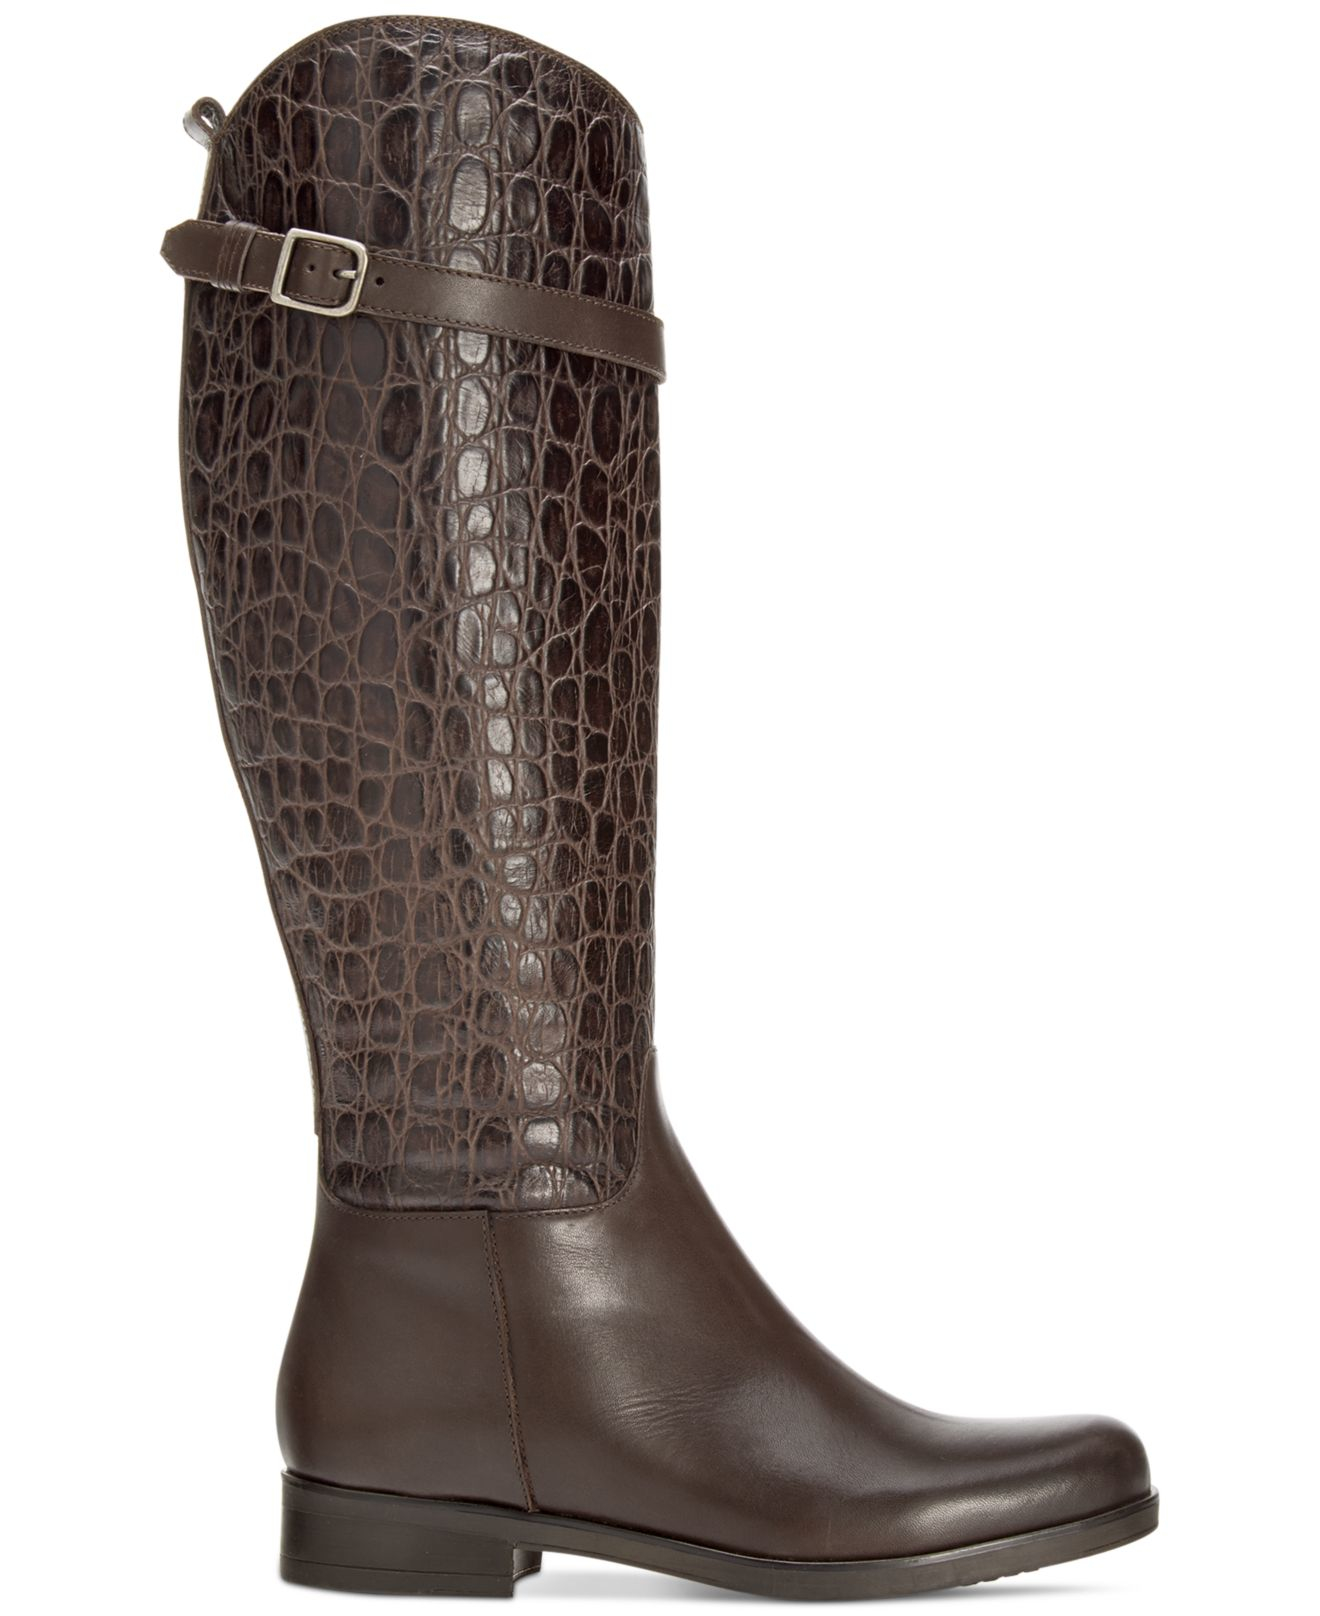 Clarks Artisan Women's Hopedale Wish Tall Boots in Brown | Lyst